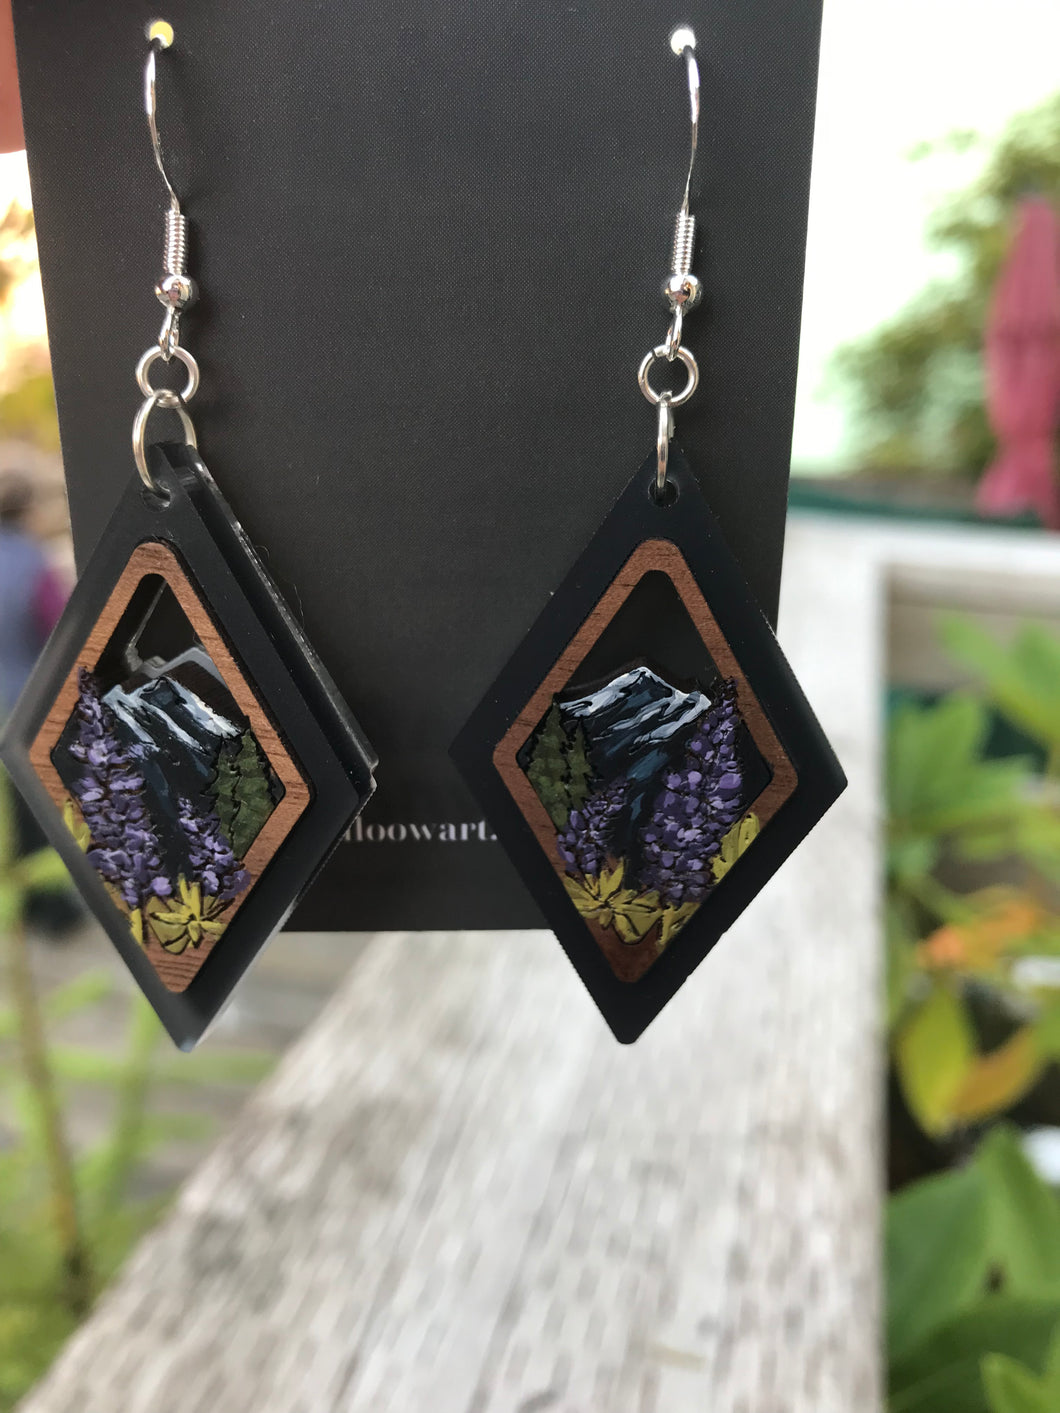 Yelloow Art Earrings- Mountains and Lupines